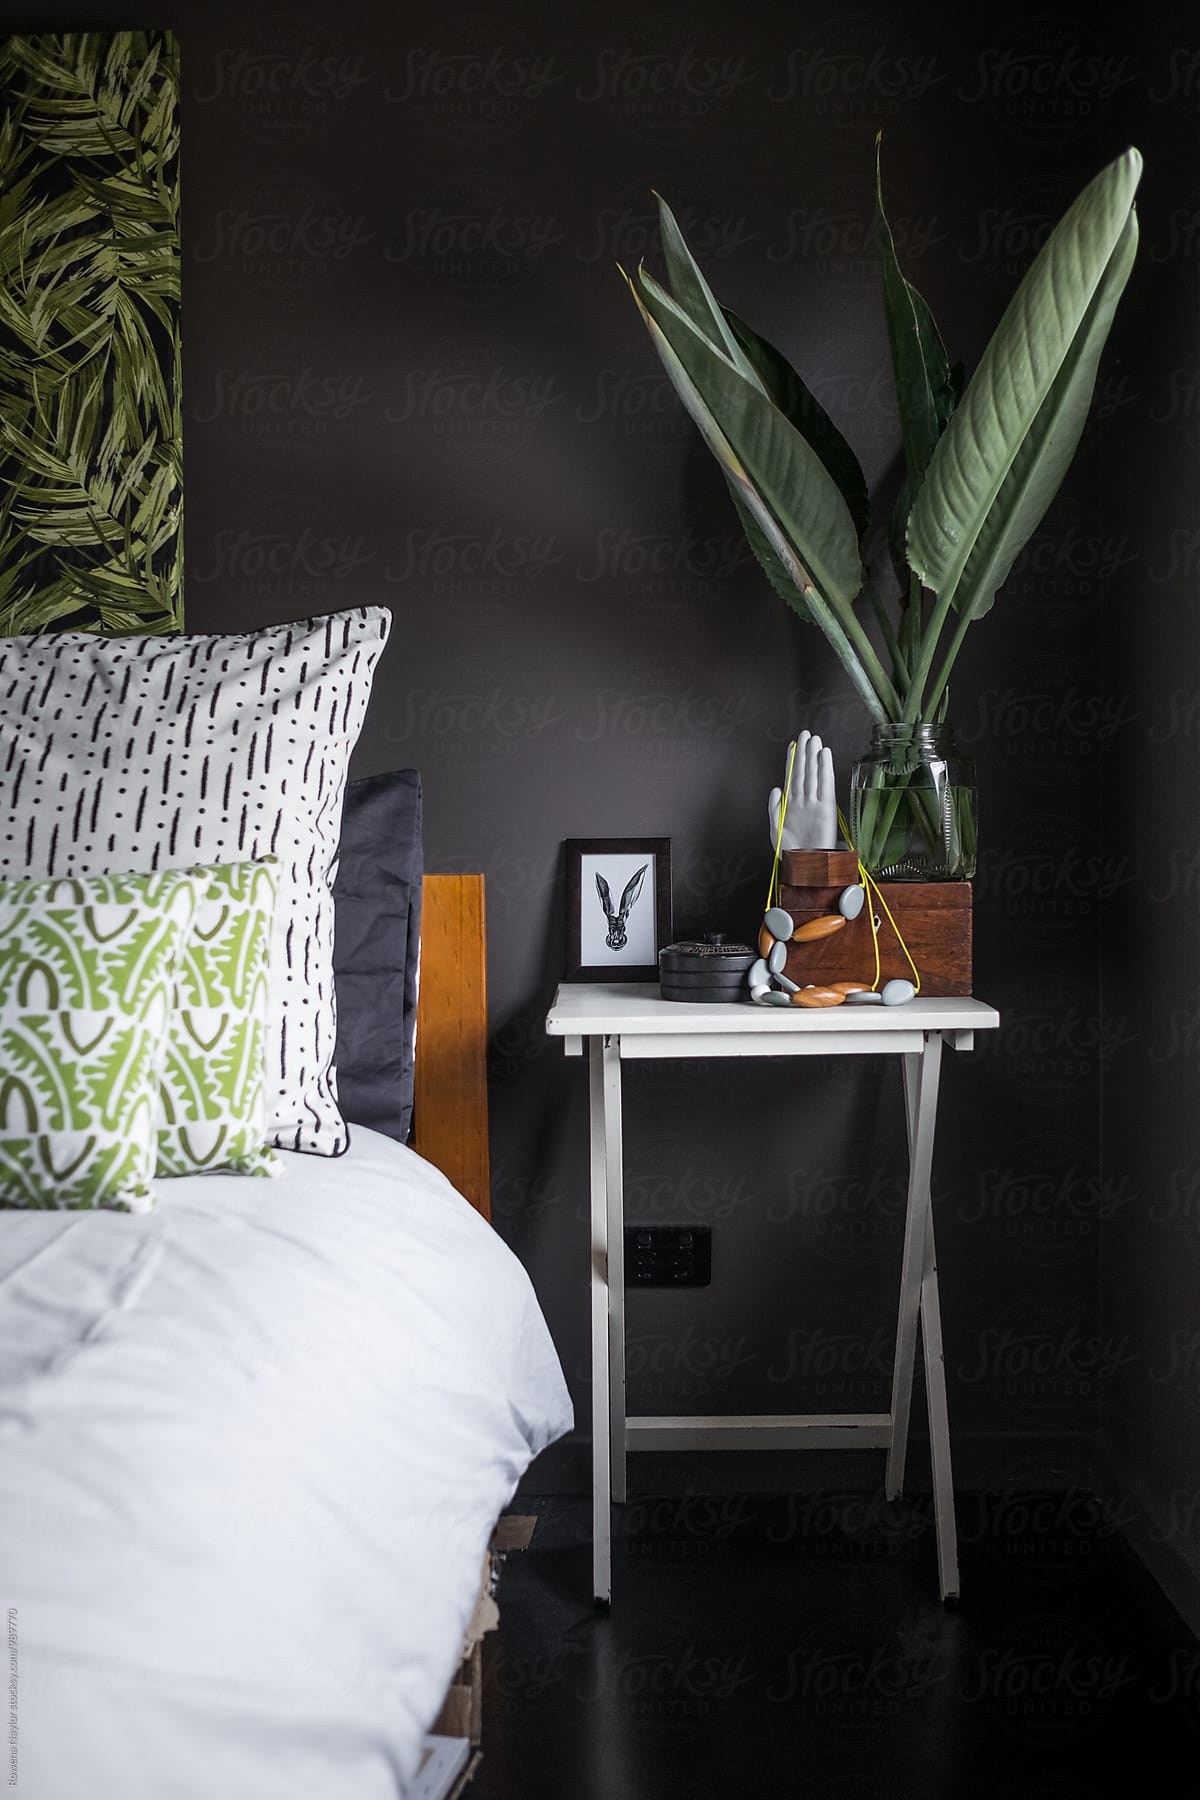 Dark styled bedroom interior with black painted wall